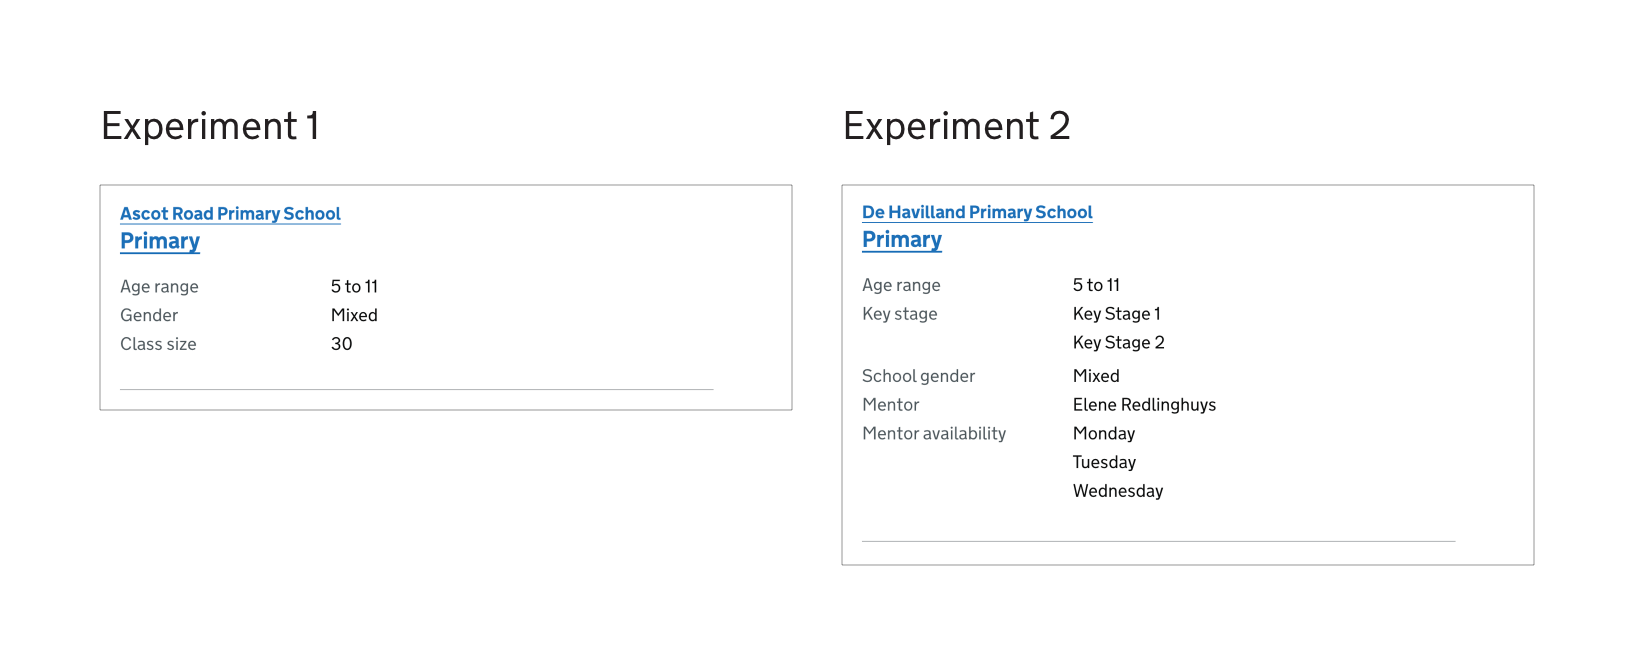 Image showing the change in search results content and layout between experiments 1 and 2